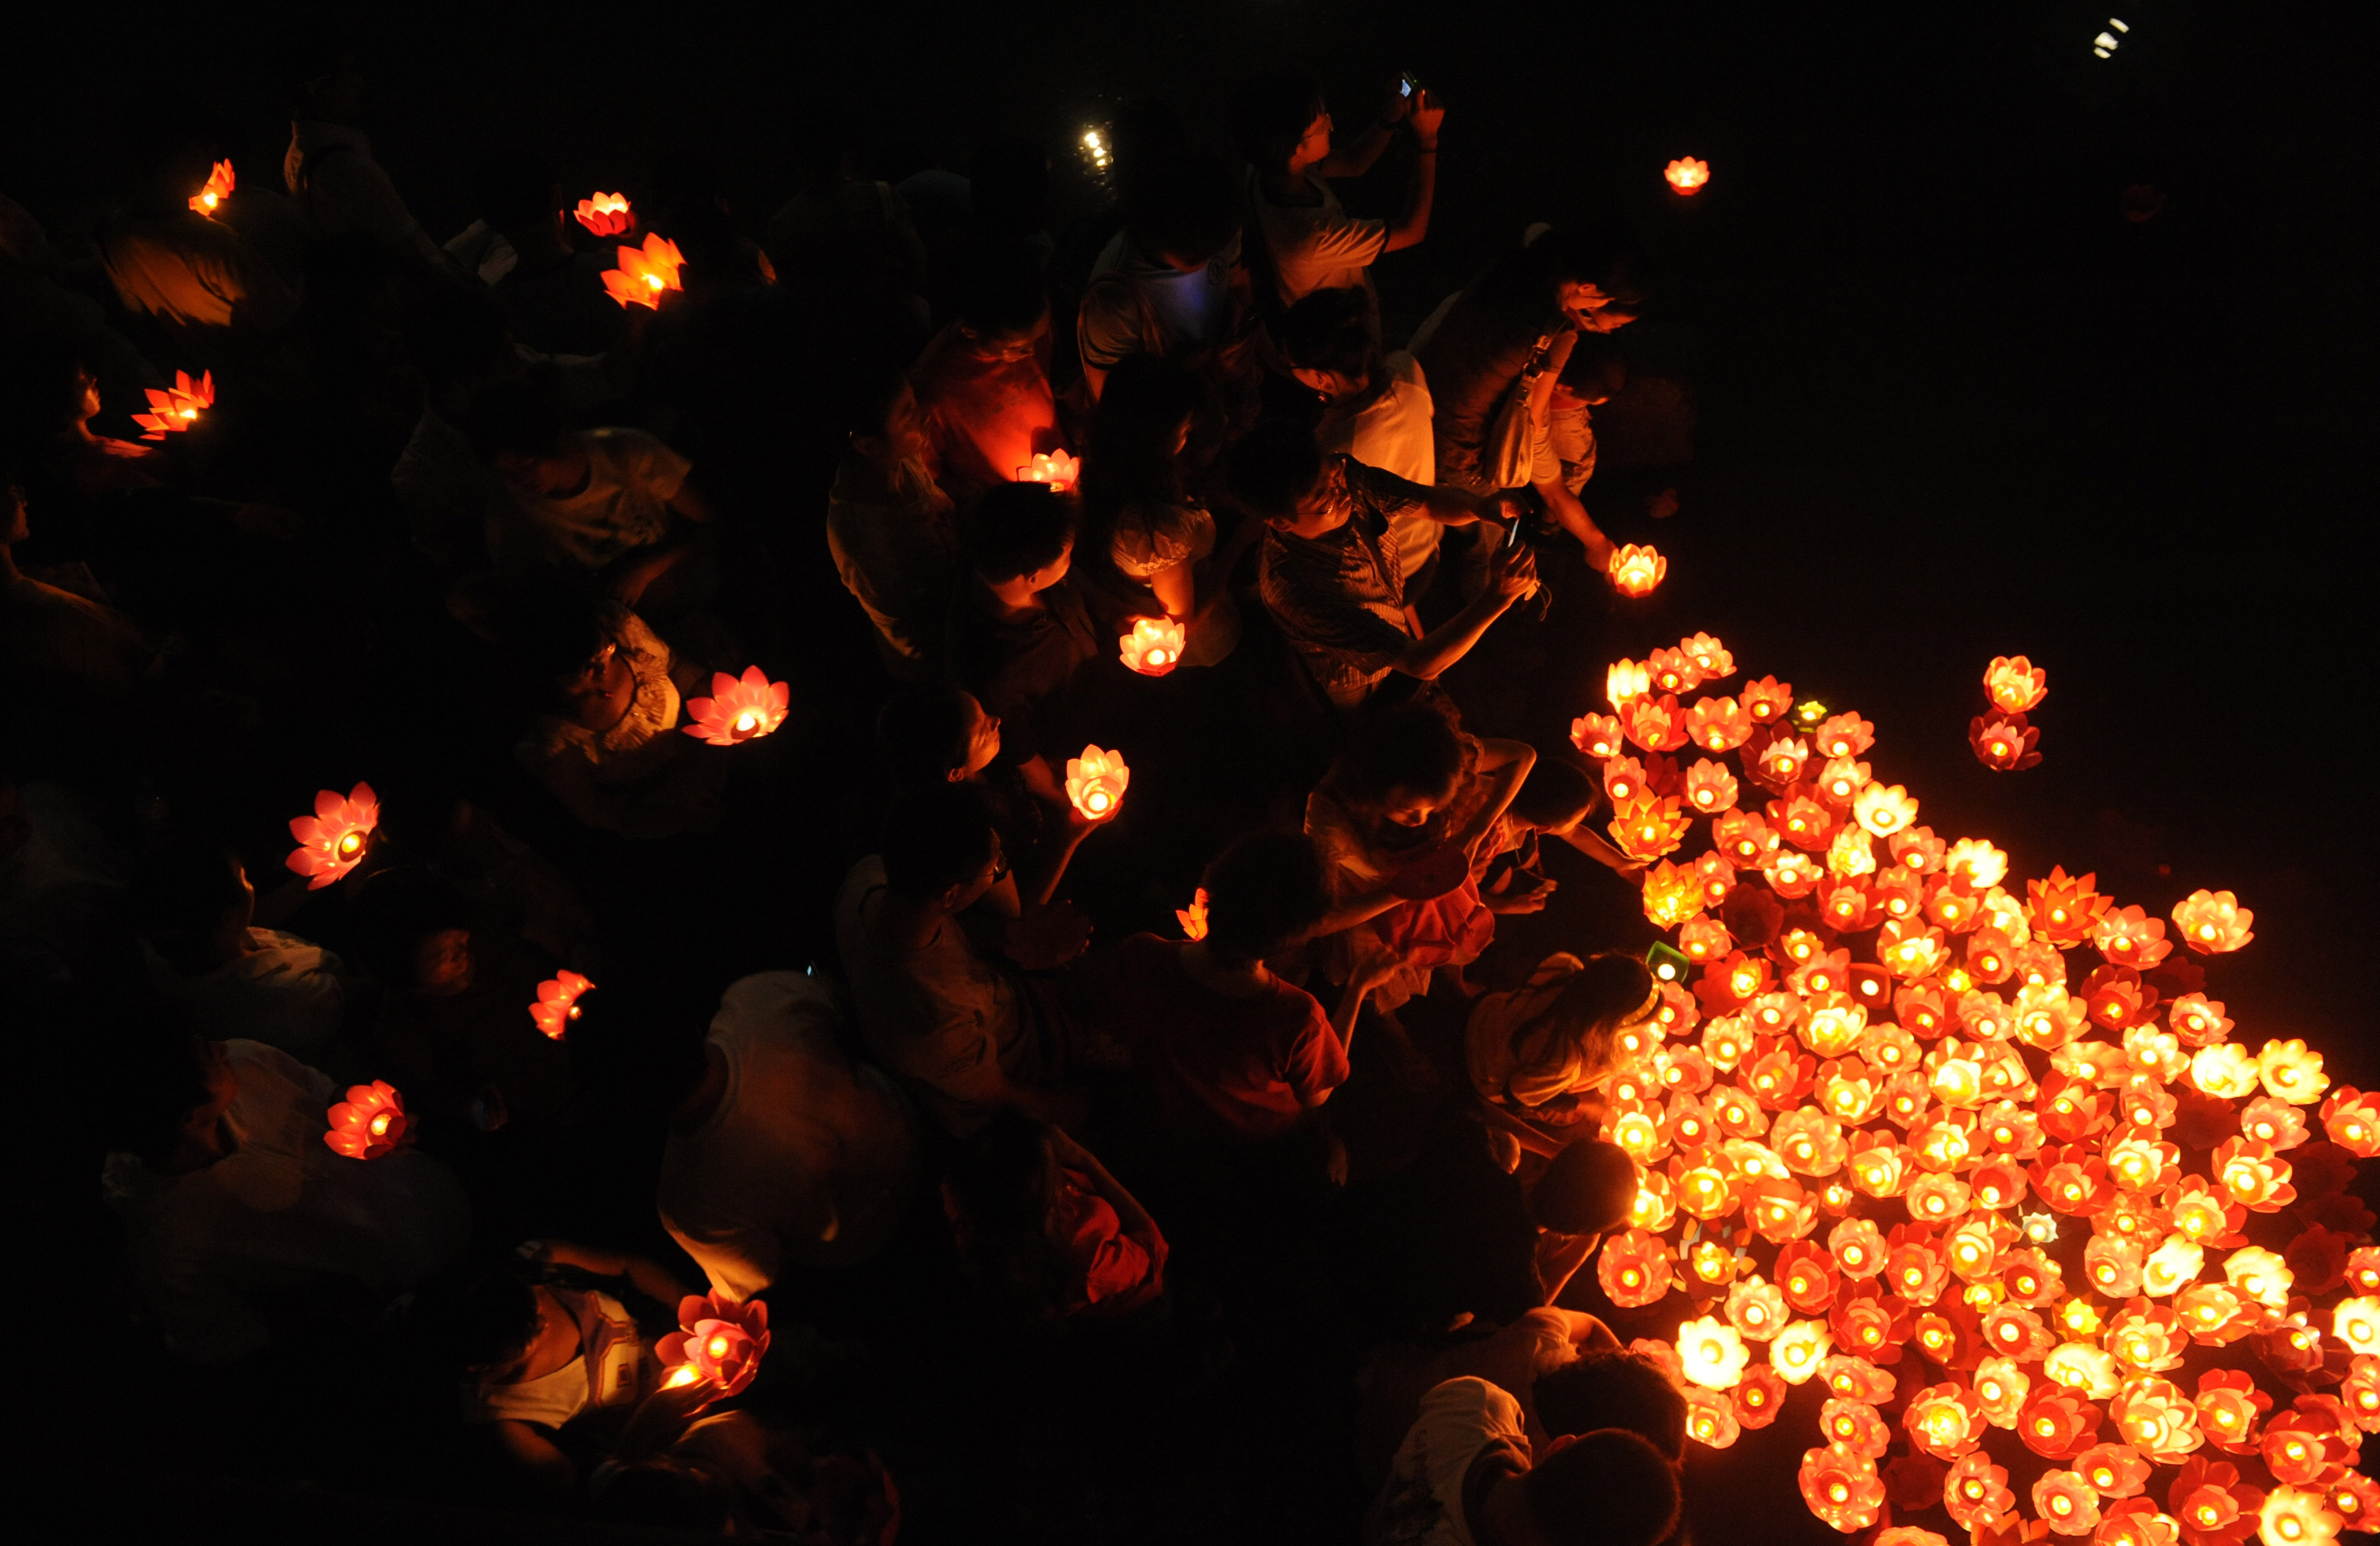 Residents lay candles on a river to mark the Mid-Autumn Festival on Sept. 14, 2008, in Chengdu, Sichuan province, China. (China Photos/Getty Images)